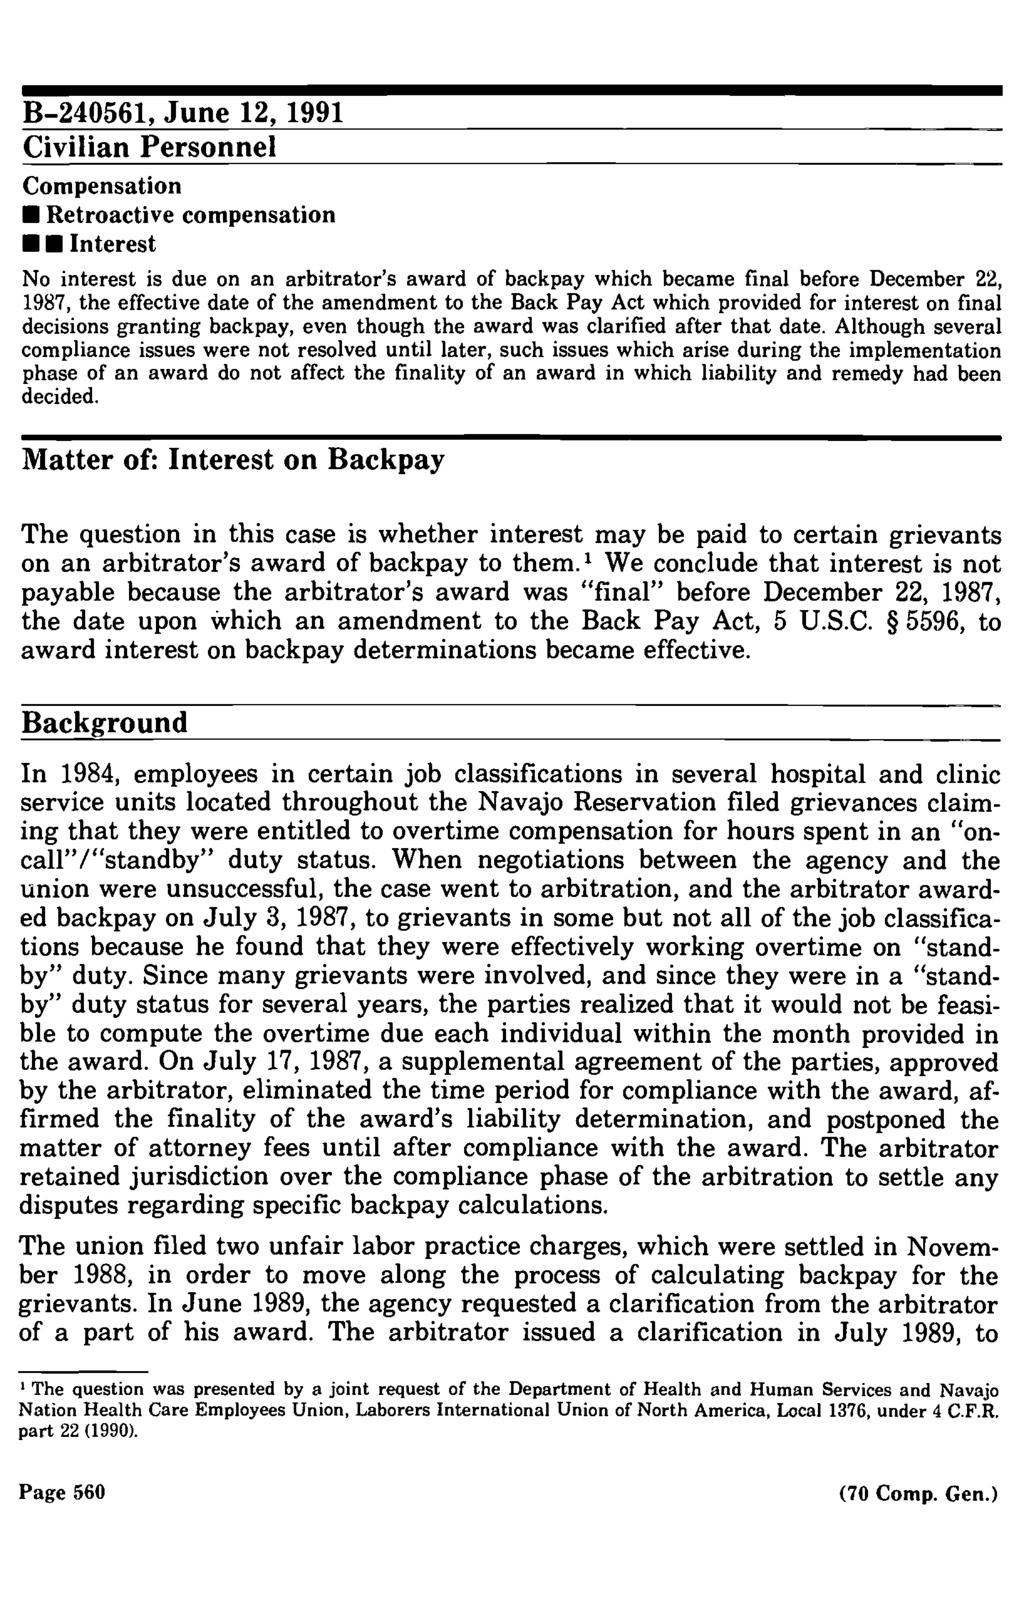 B 240561, June 12, 1991 Civilian Personnel Compensation Retroactive compensation U Interest No interest is due on an arbitrator's award of backpay which became final before December 22, 1987, the